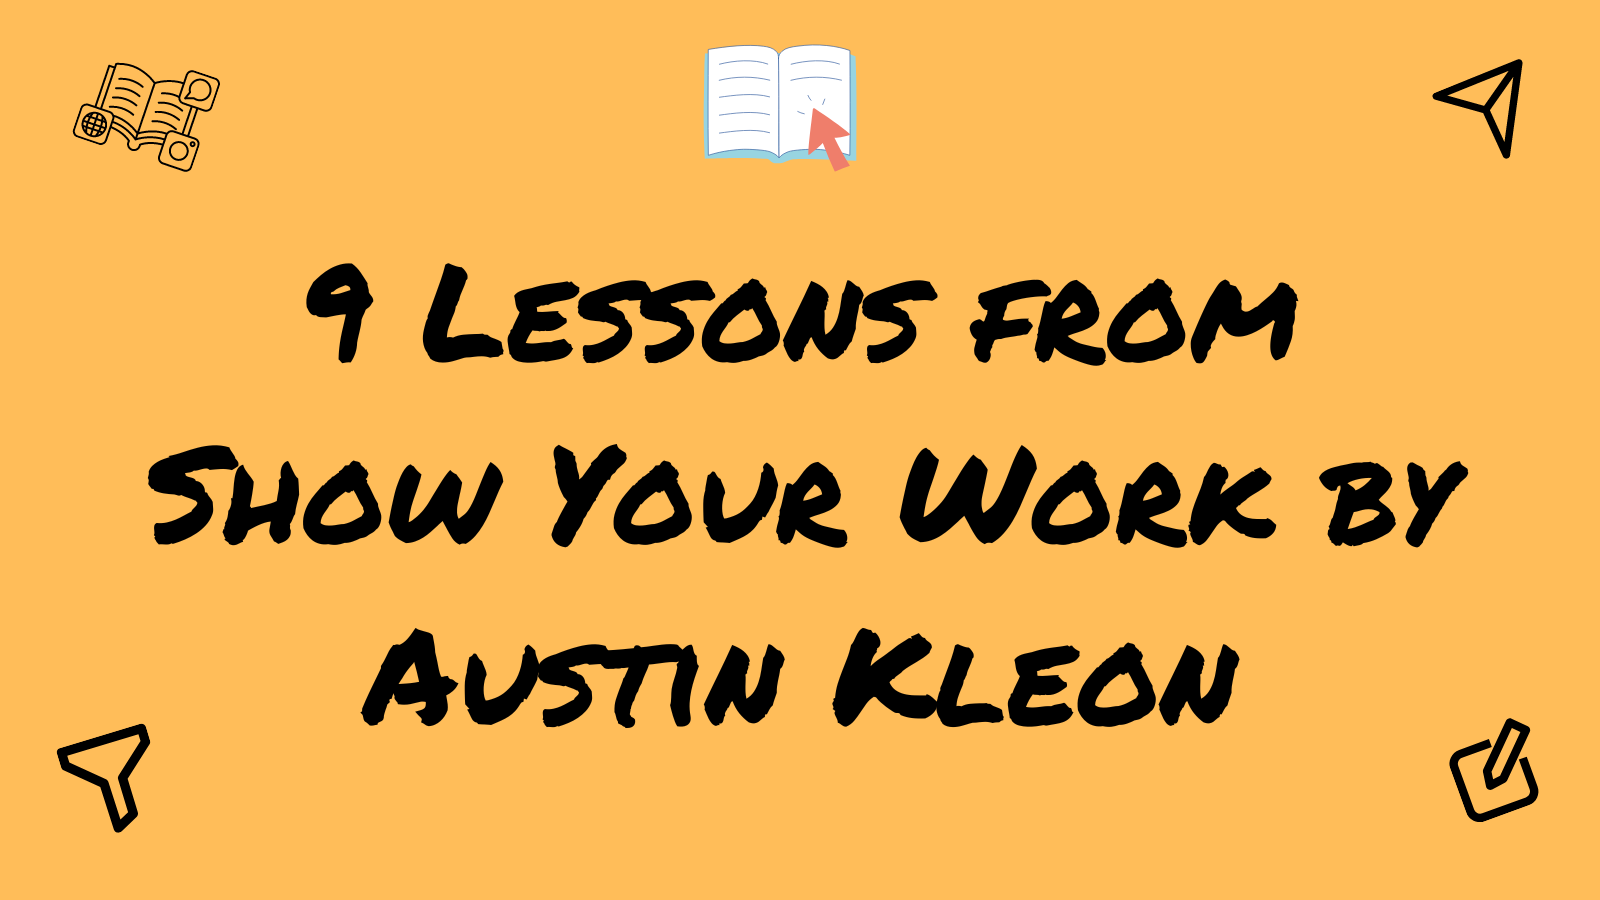 9 Lessons from Show Your Work by Austin Kleon (and how to apply them on Twitter!)